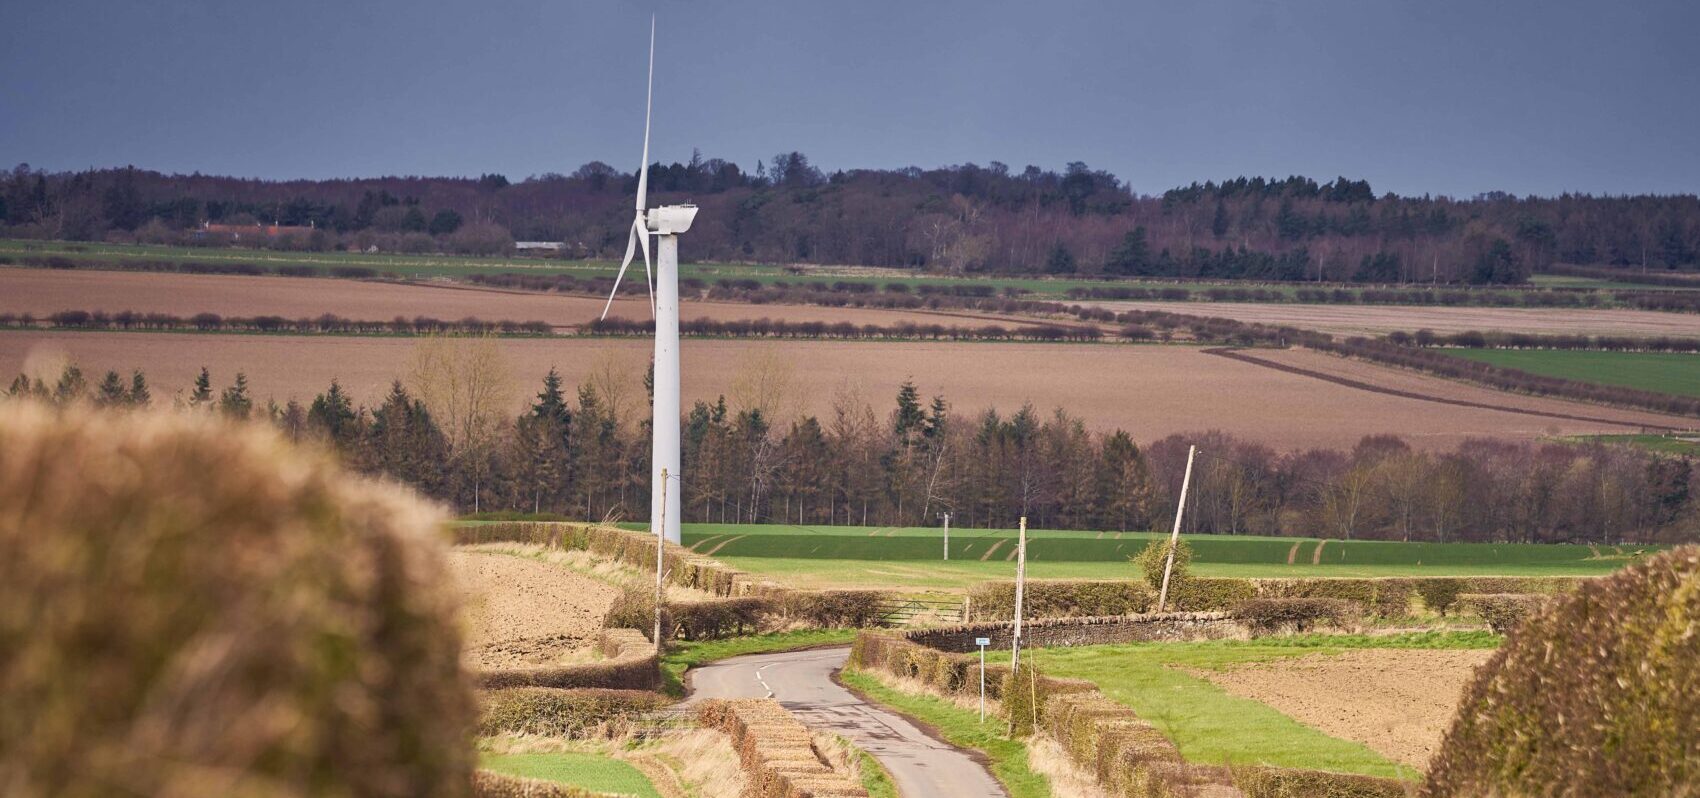 Rural landscape featuring hay bales, wind turbine and winding road